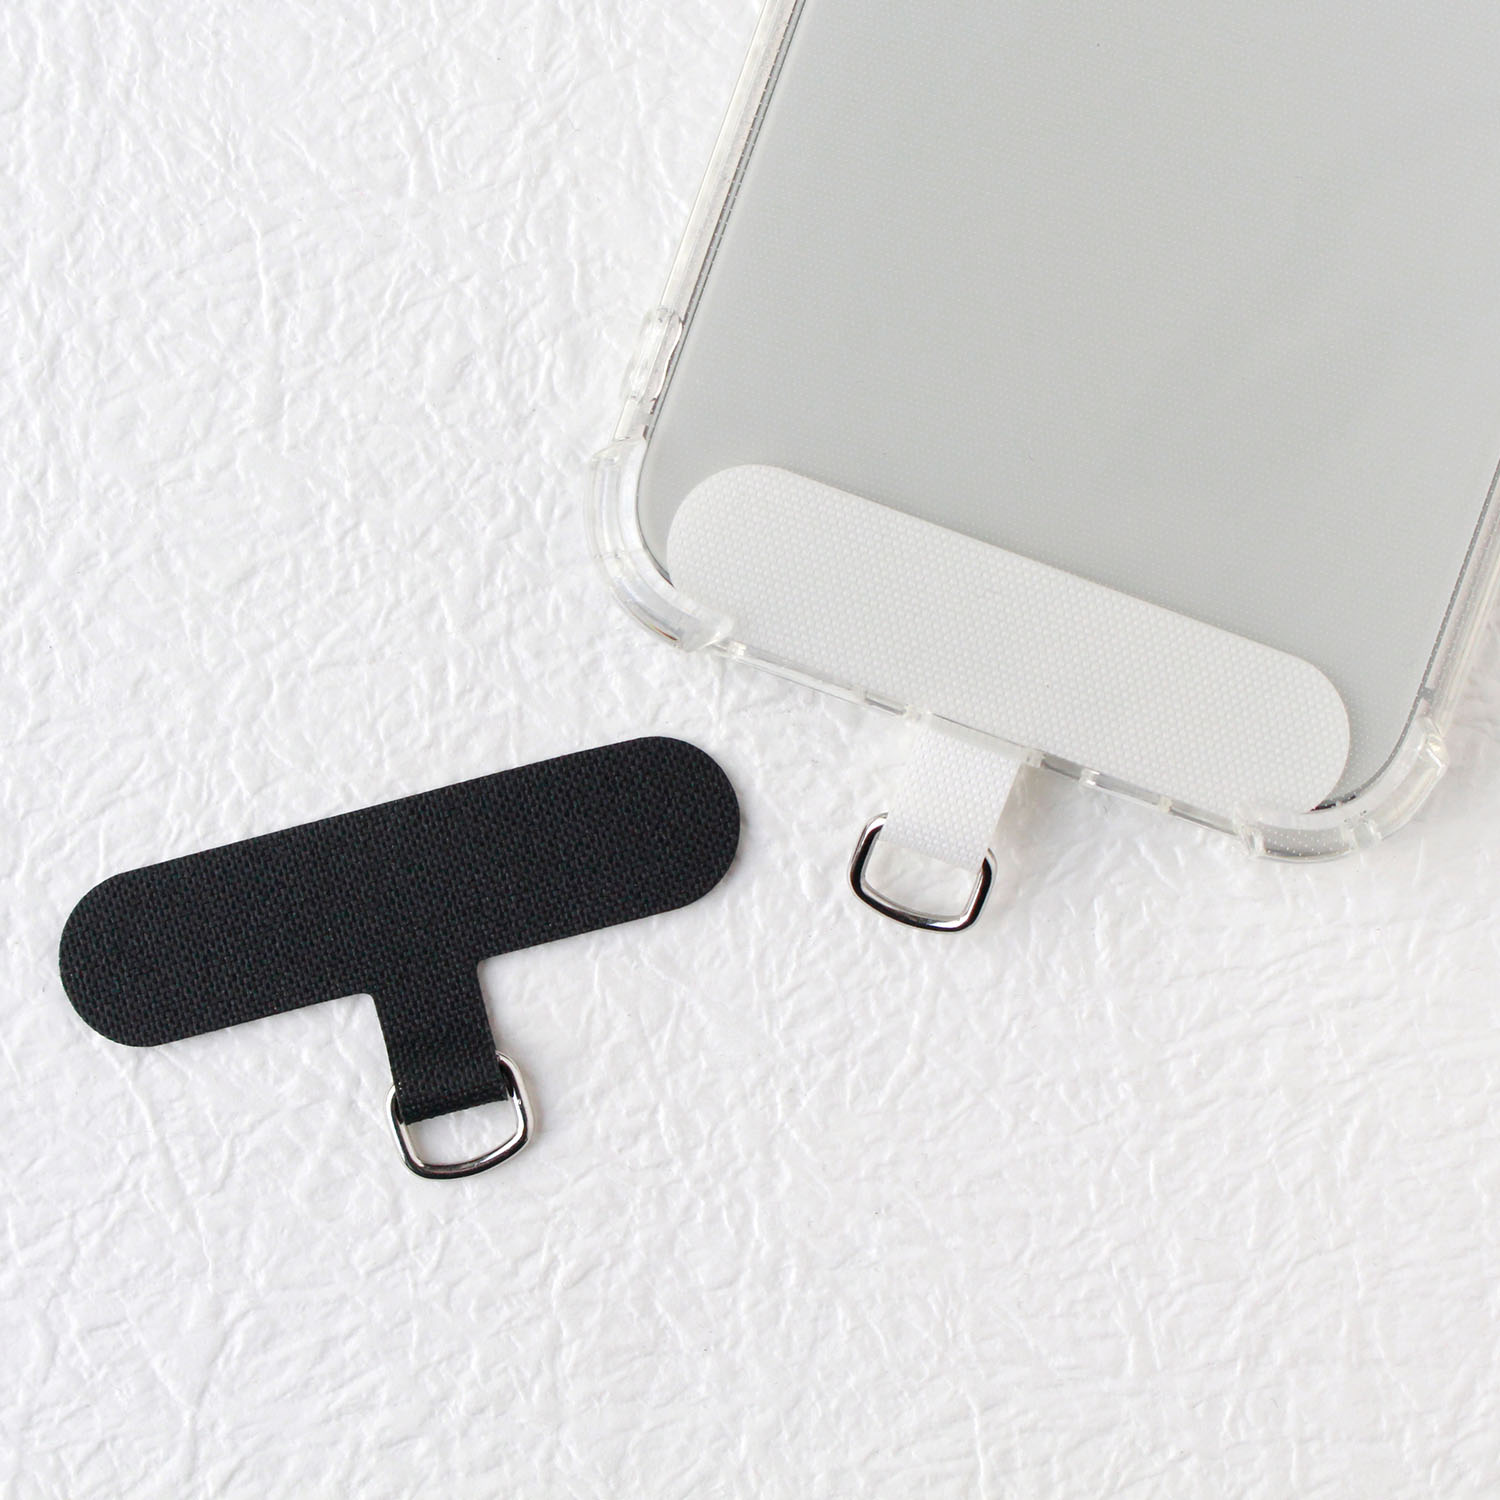 SS Smartphone strap holder parts, D-can type 1pcs (bag)